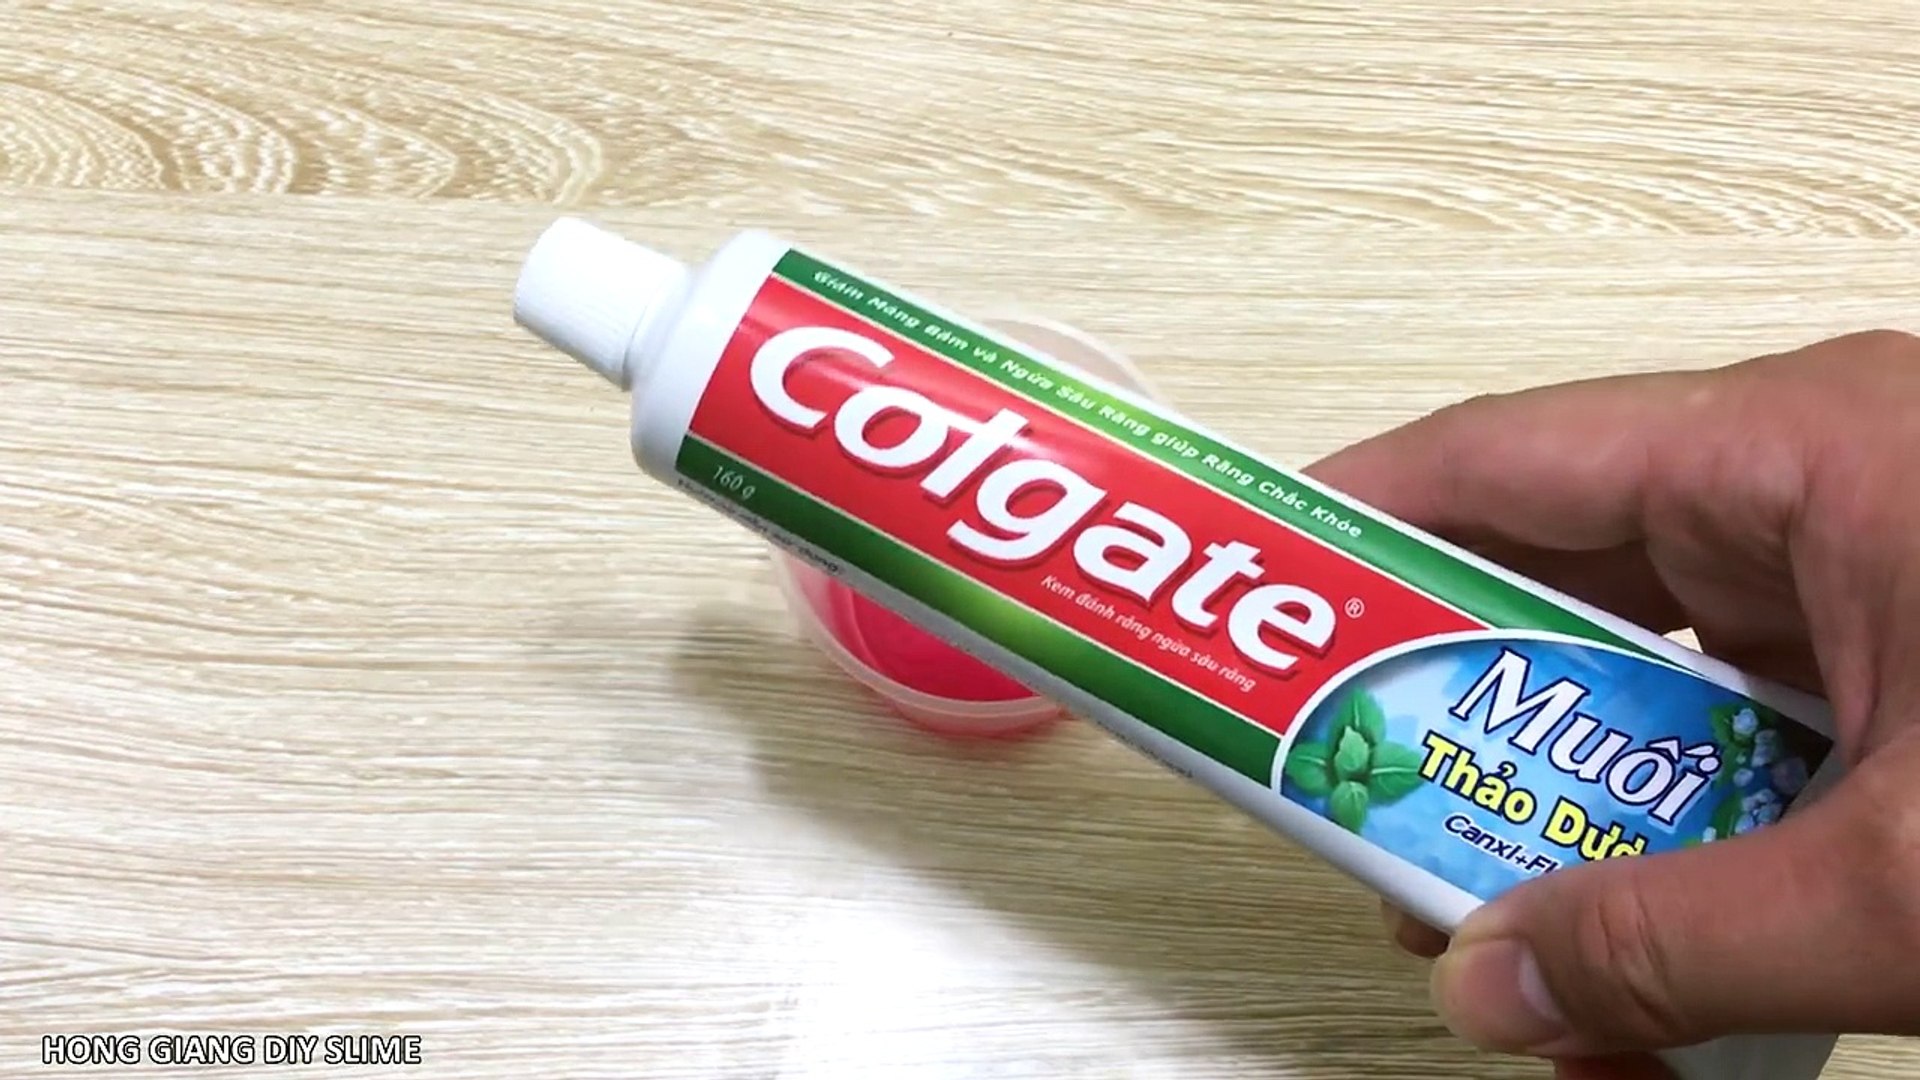 Hand Soap Colgate And Sugar Slime No Glue Slime With Hand